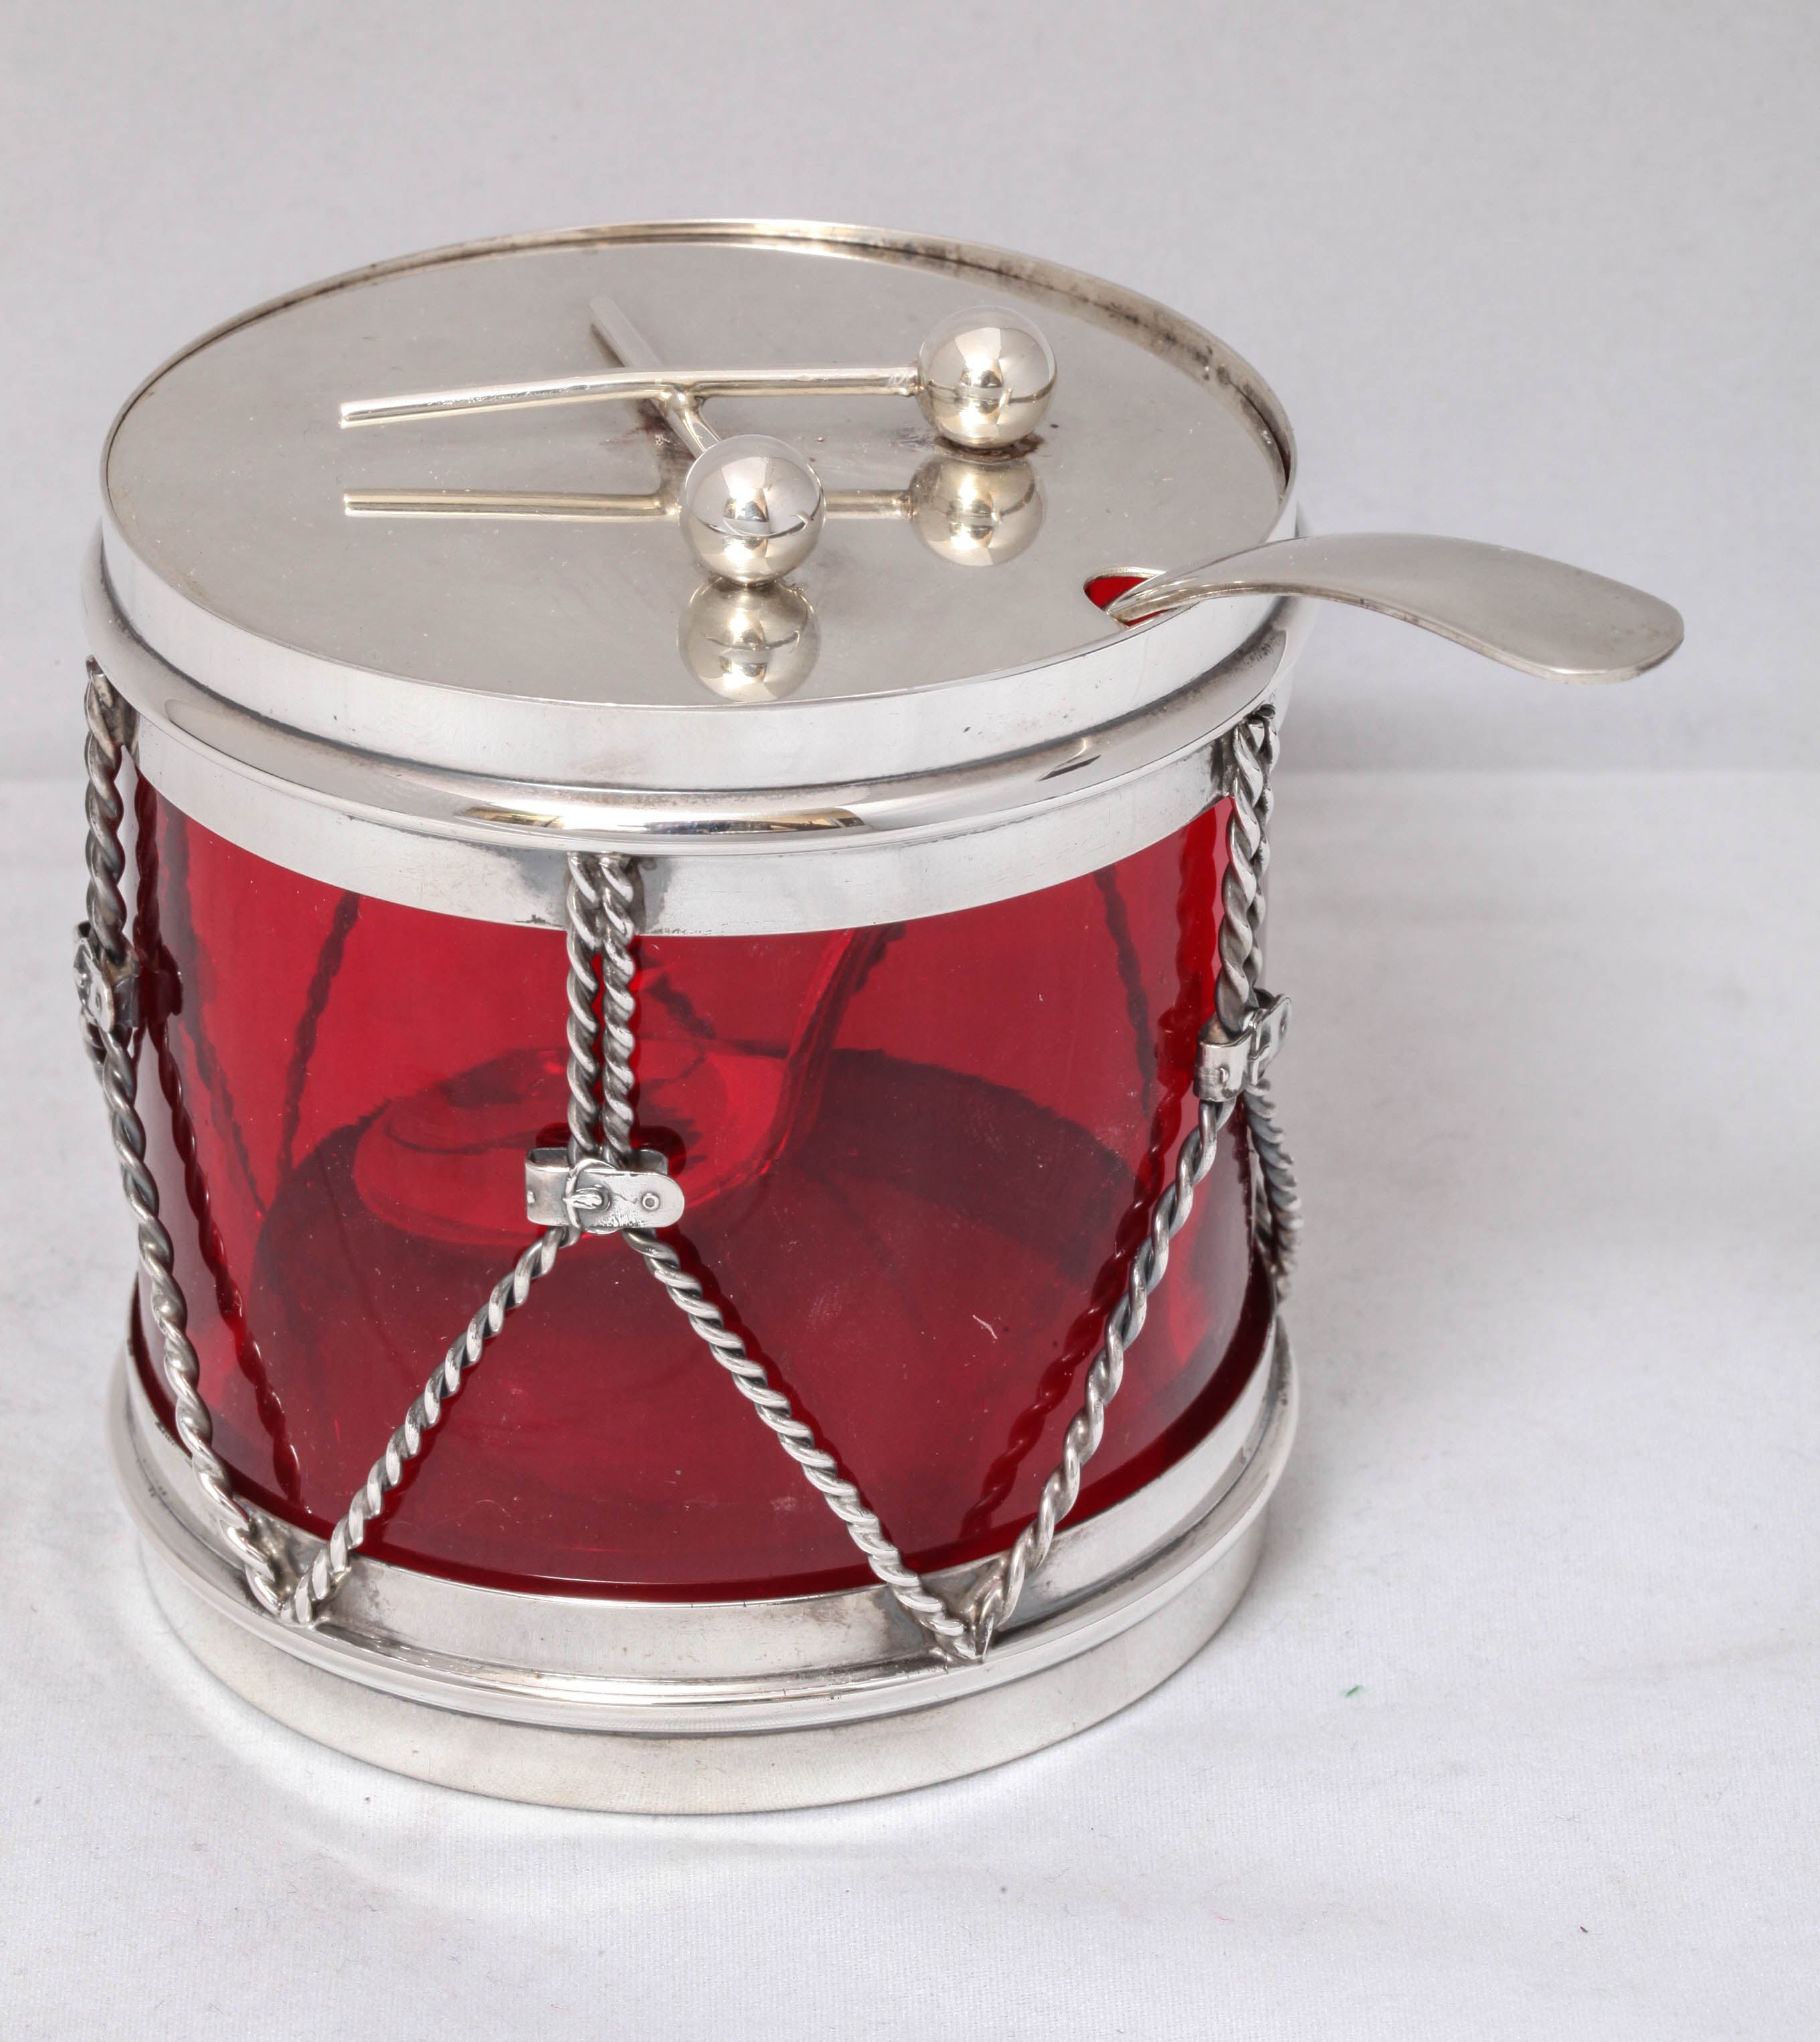 American Art Deco Sterling Silver-Mounted Ruby Glass Drum-Form Condiments Jar with Spoon